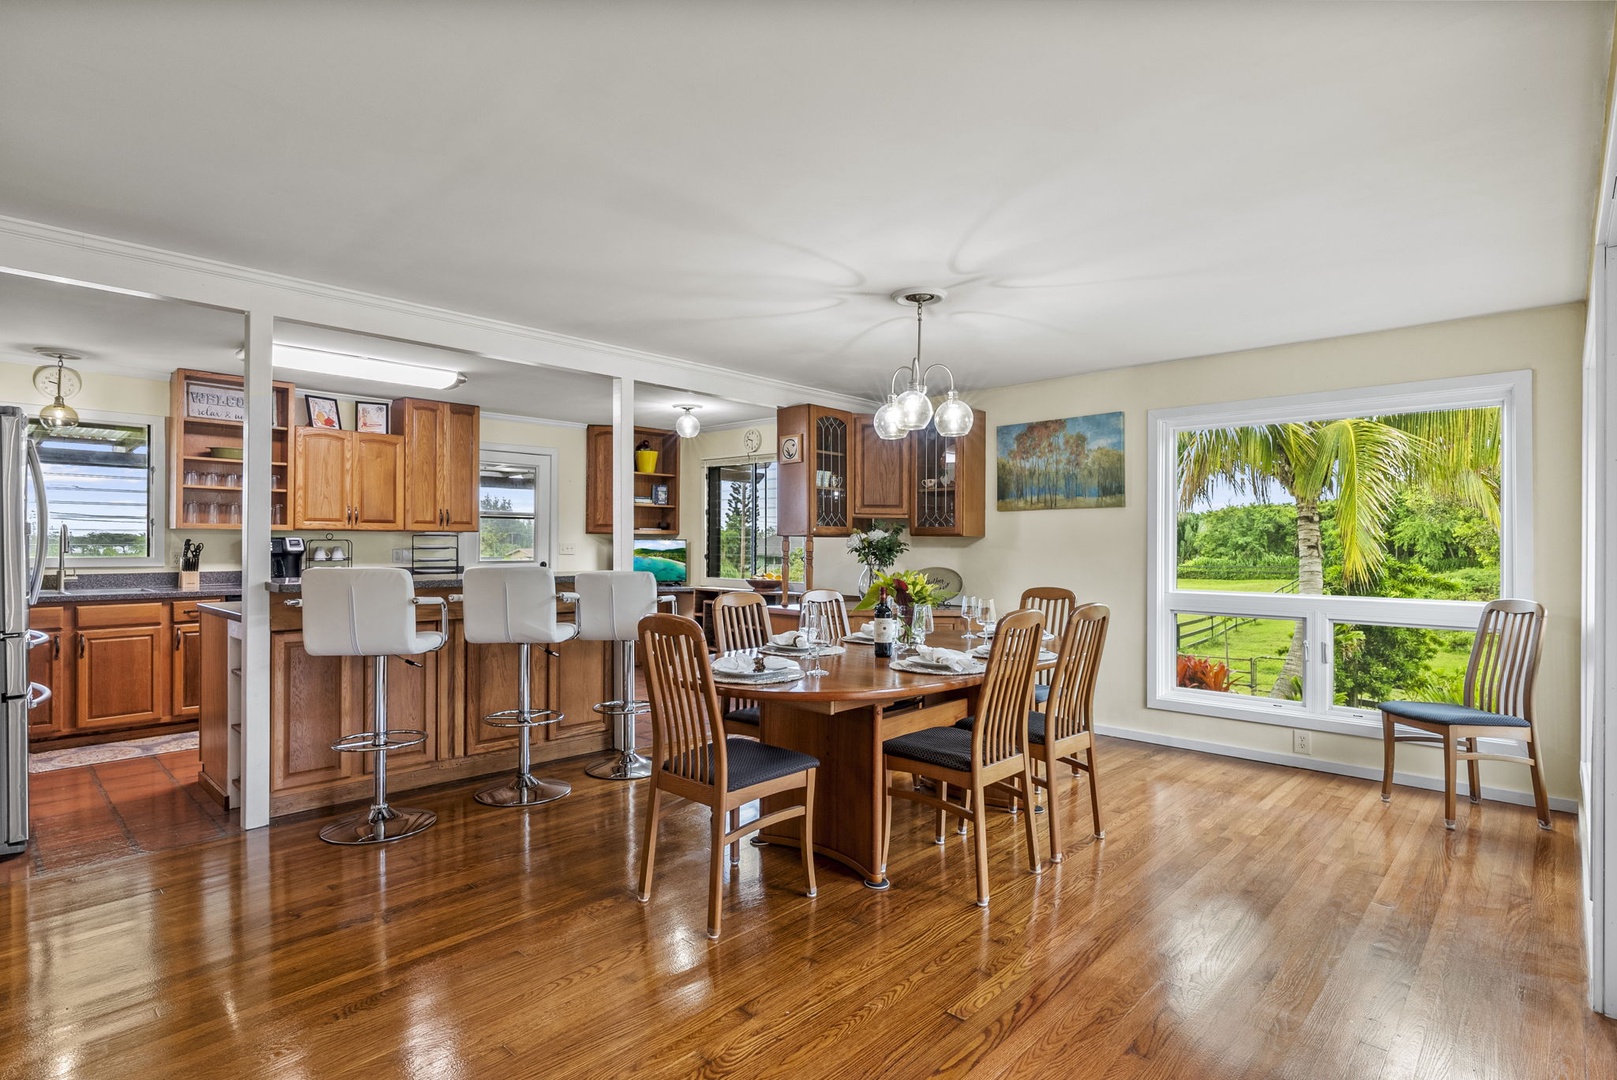 Hauula Vacation Rentals, Mau Loa Hale - Open concept from dining to kitchen area